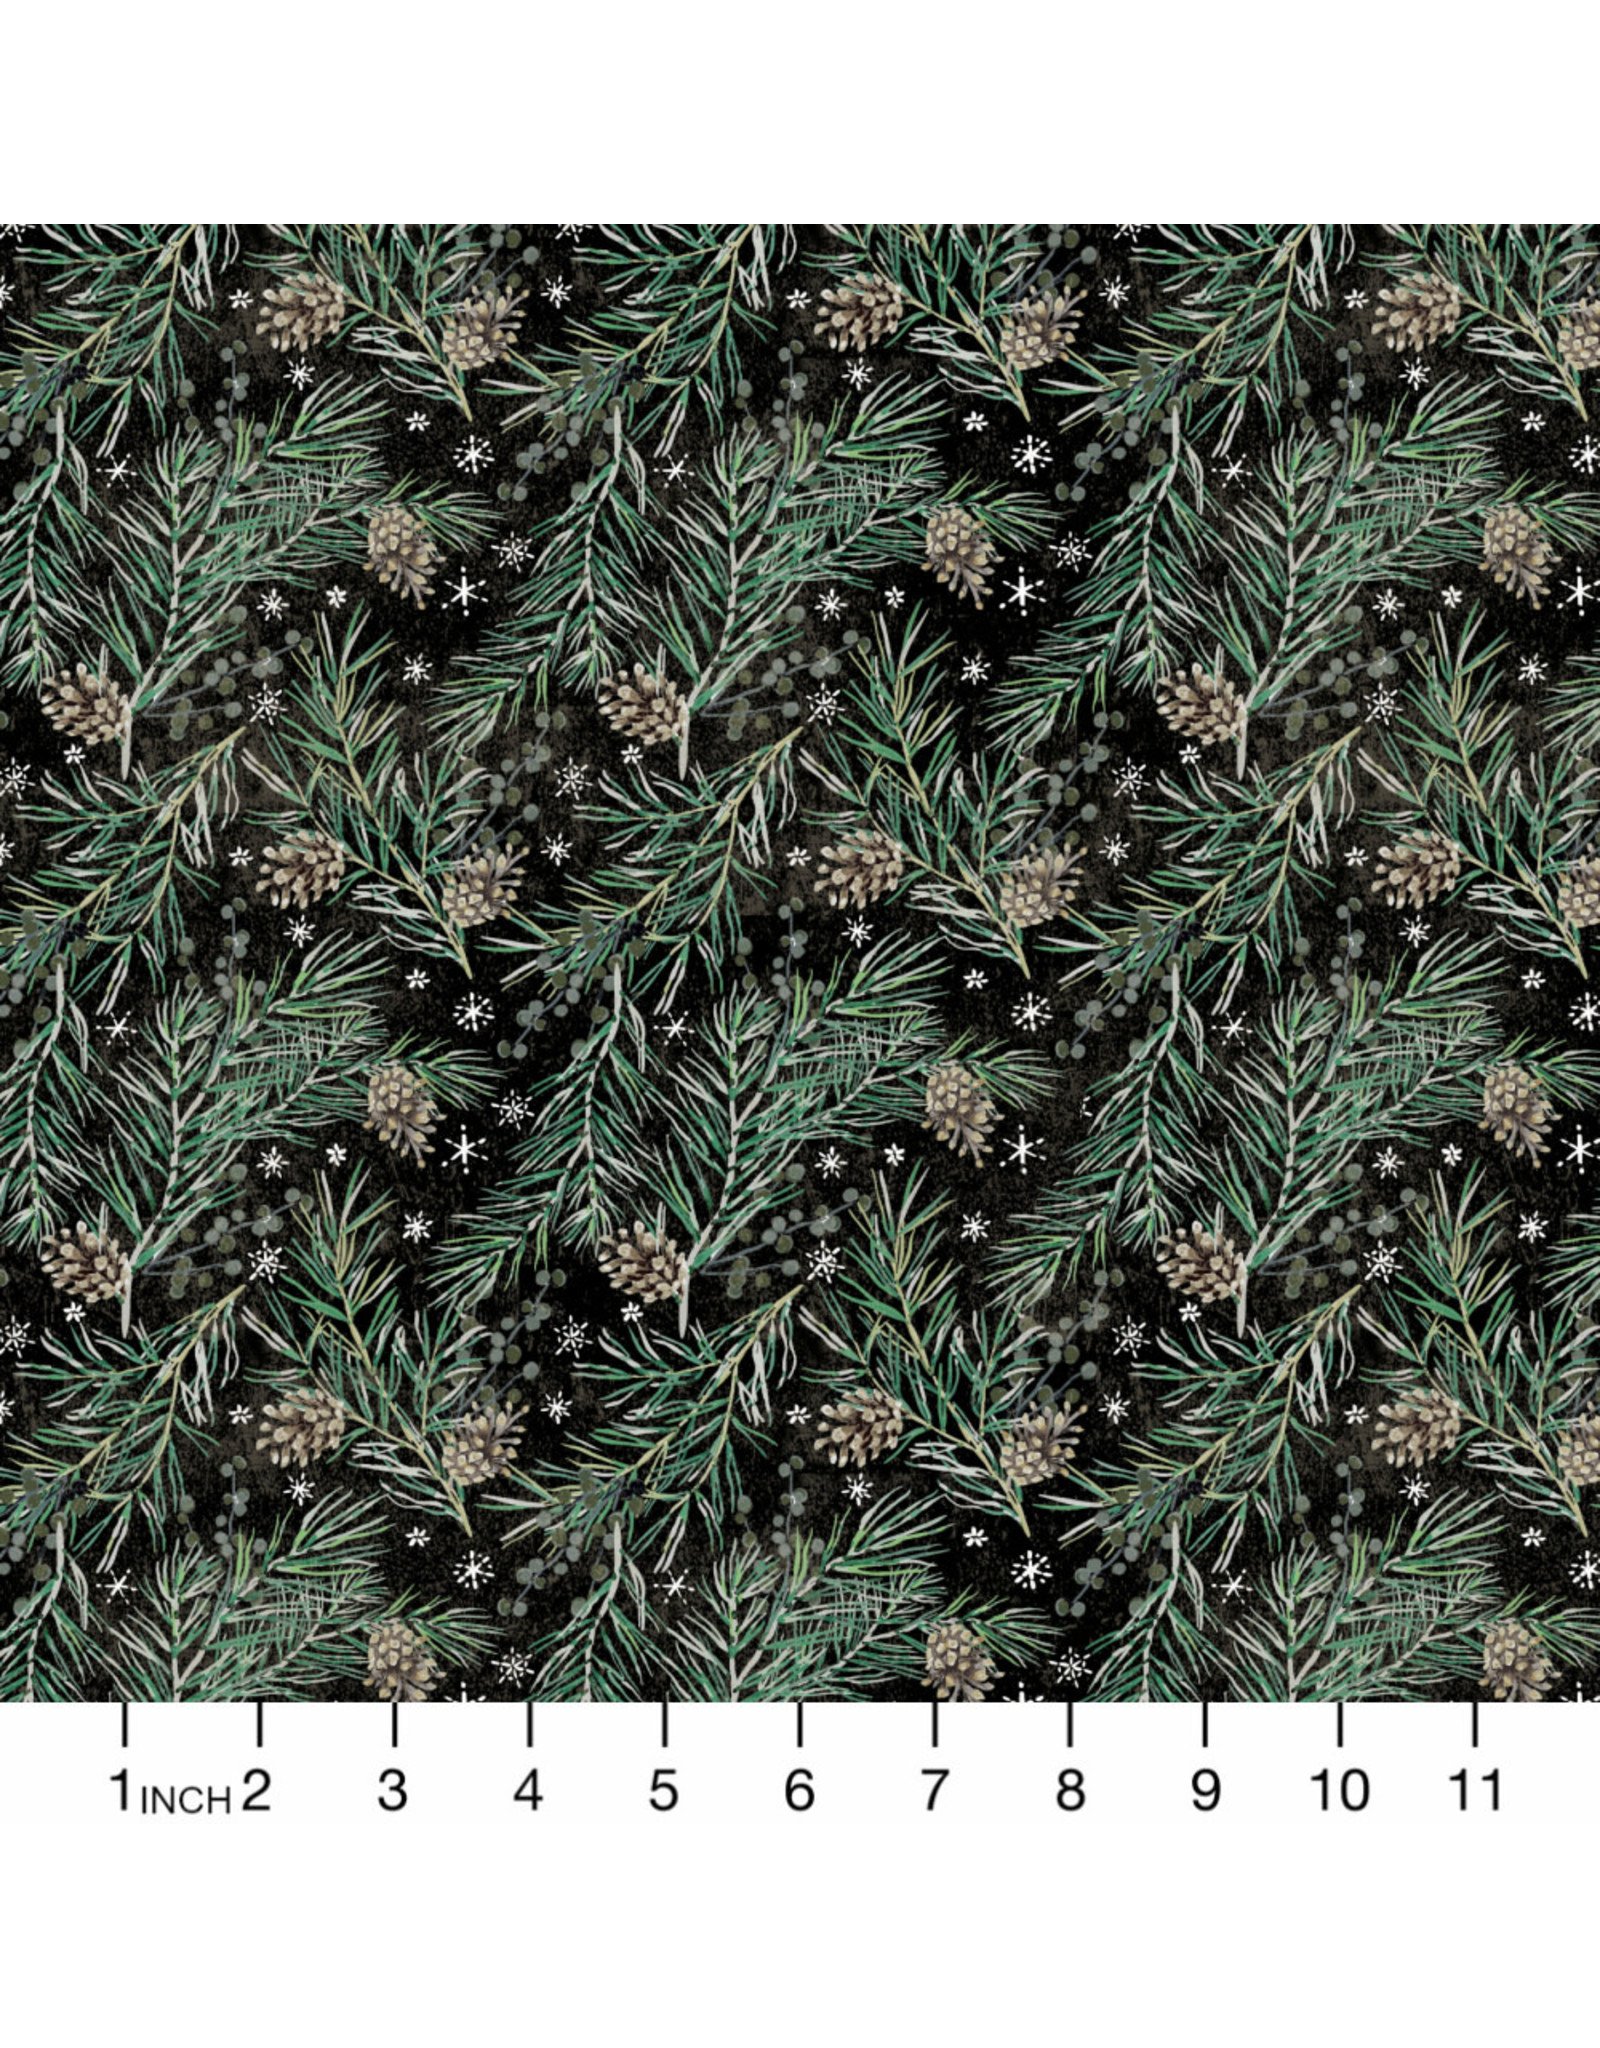 Tim Holtz Christmastime, Pine Boughs in Black, Fabric Half-Yards